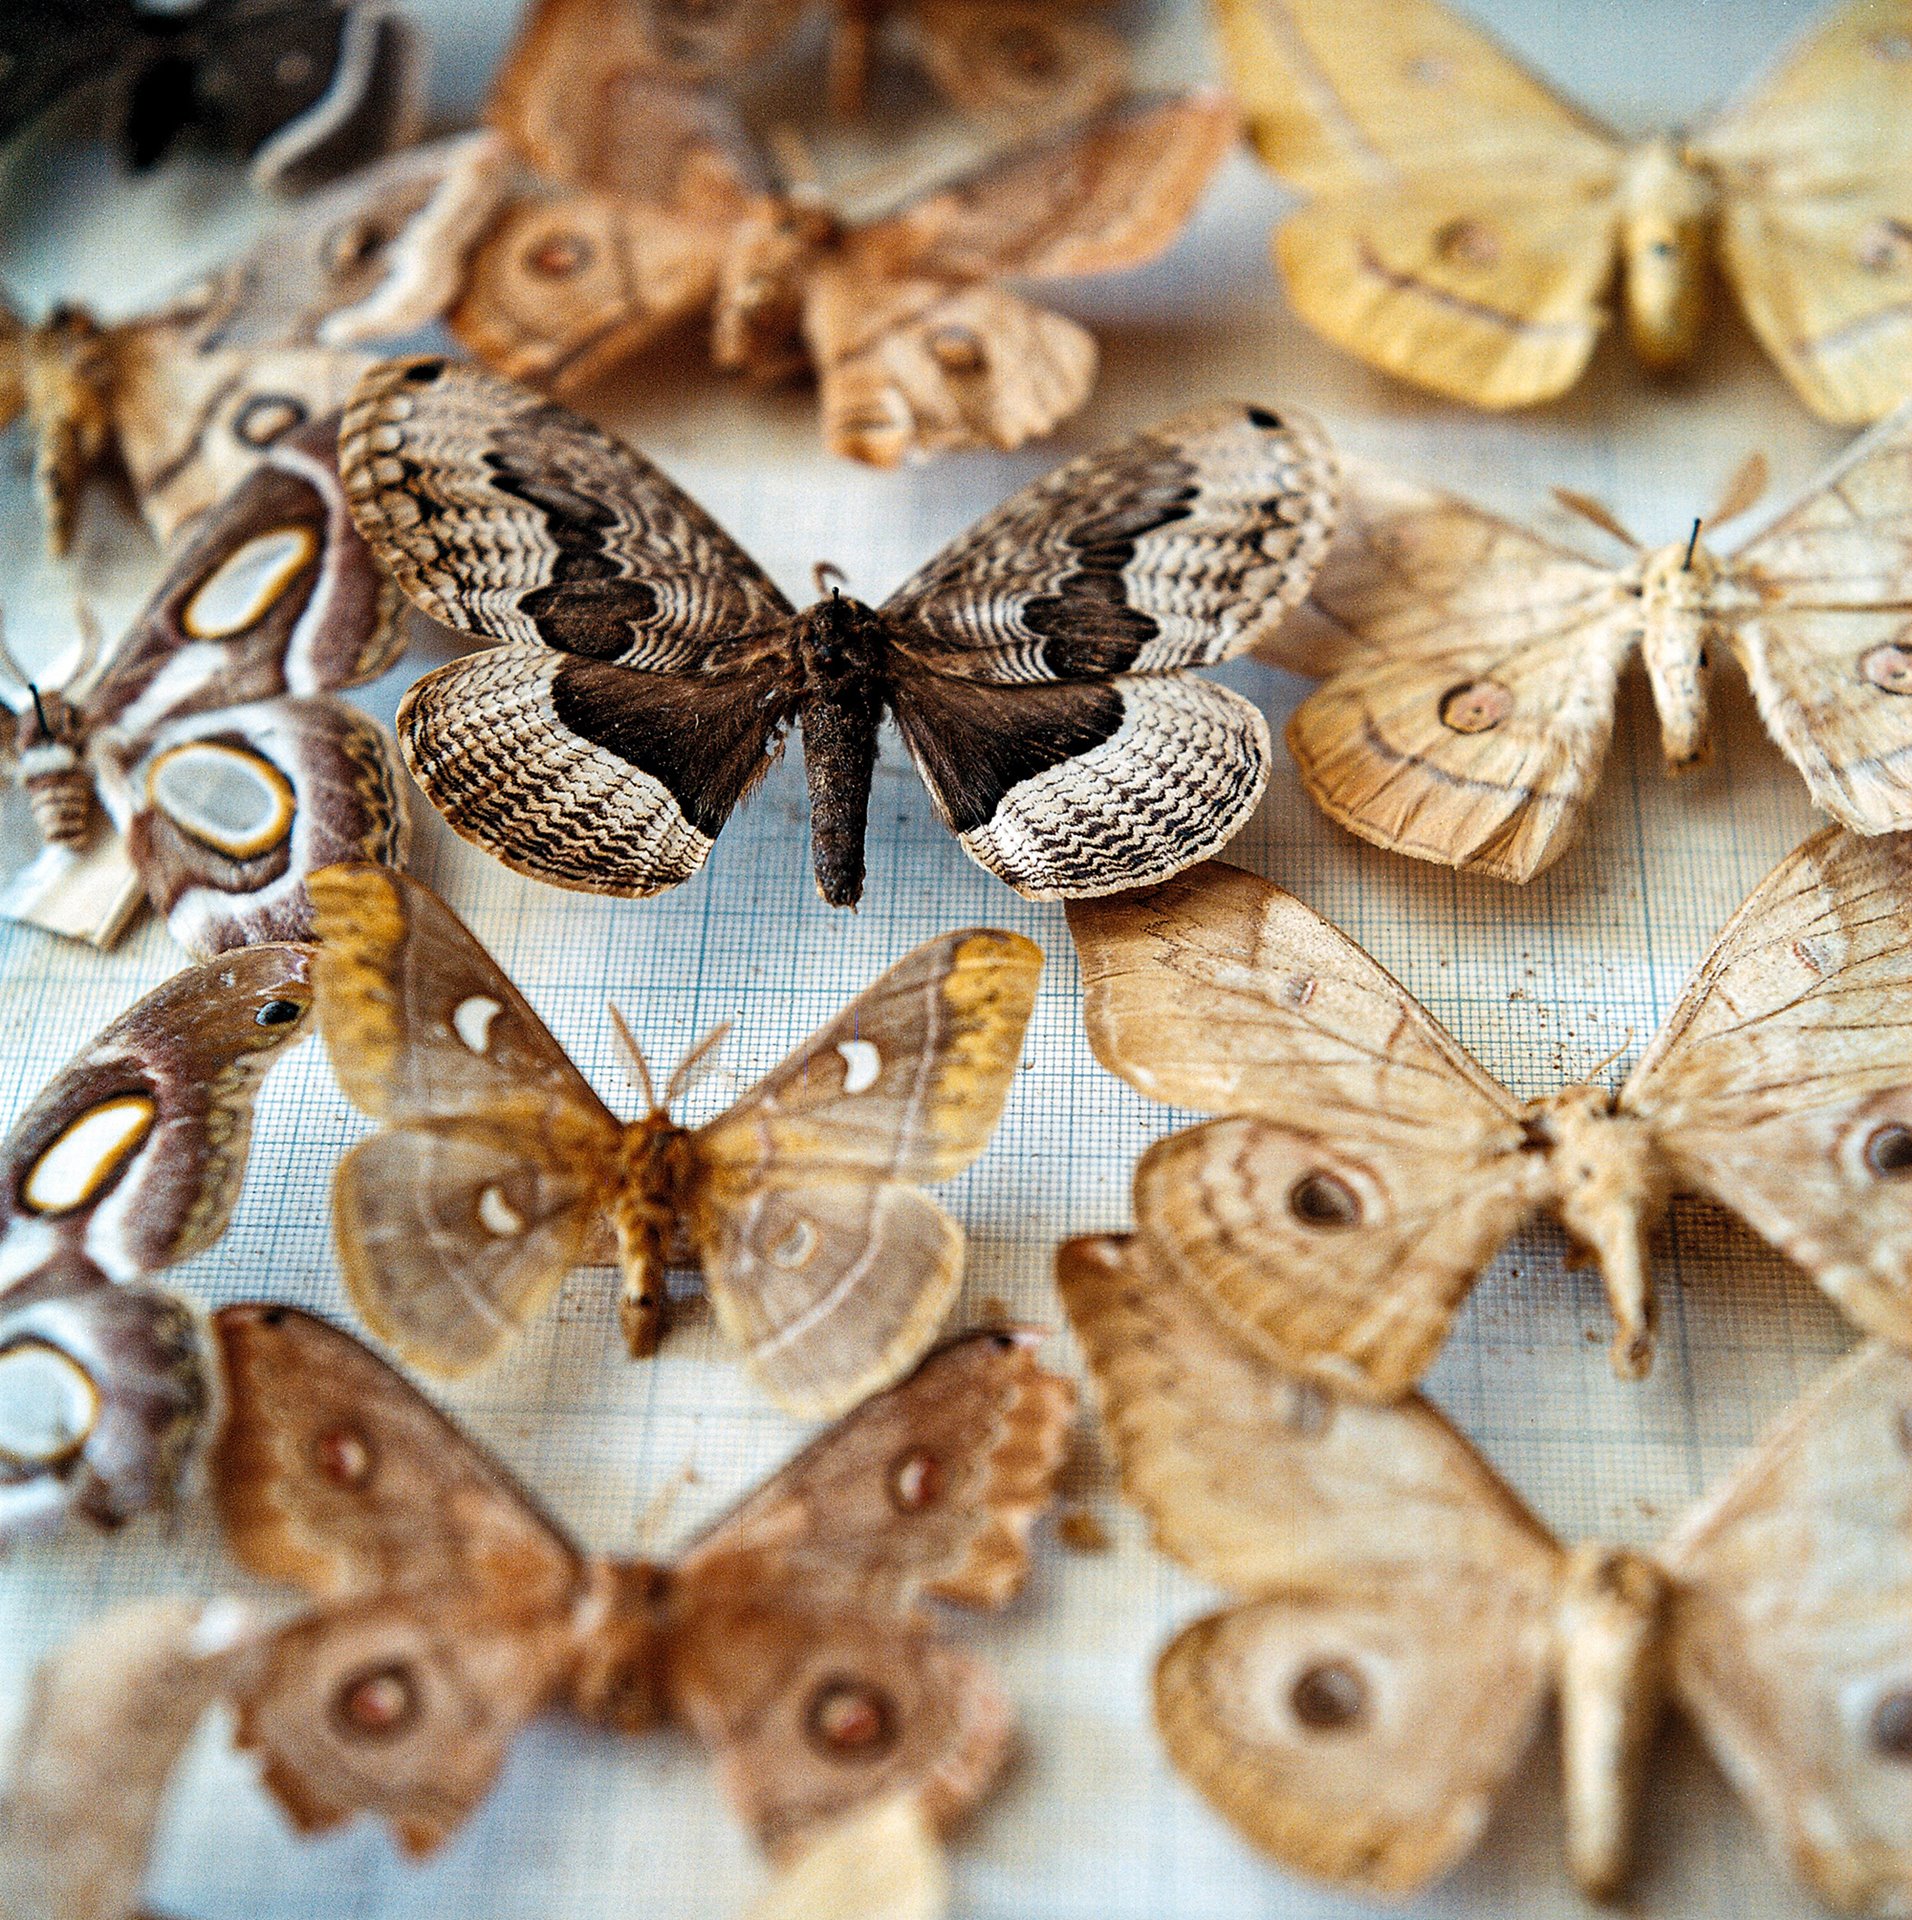 A rare <em>Brahmaea christophi moth </em>(center) displayed in Rustam Effendi&rsquo;s butterfly collection housed at the Azerbaijan State Institute of Zoology, in Baku, Azerbaijan. Effendi hunted, collected, and preserved lepidoptera from the region for forty years. After he passed away in 1991, much of Effend&rsquo;s collection &ndash; which once contained over 90,000 specimens &ndash; was lost or degraded due to neglect.